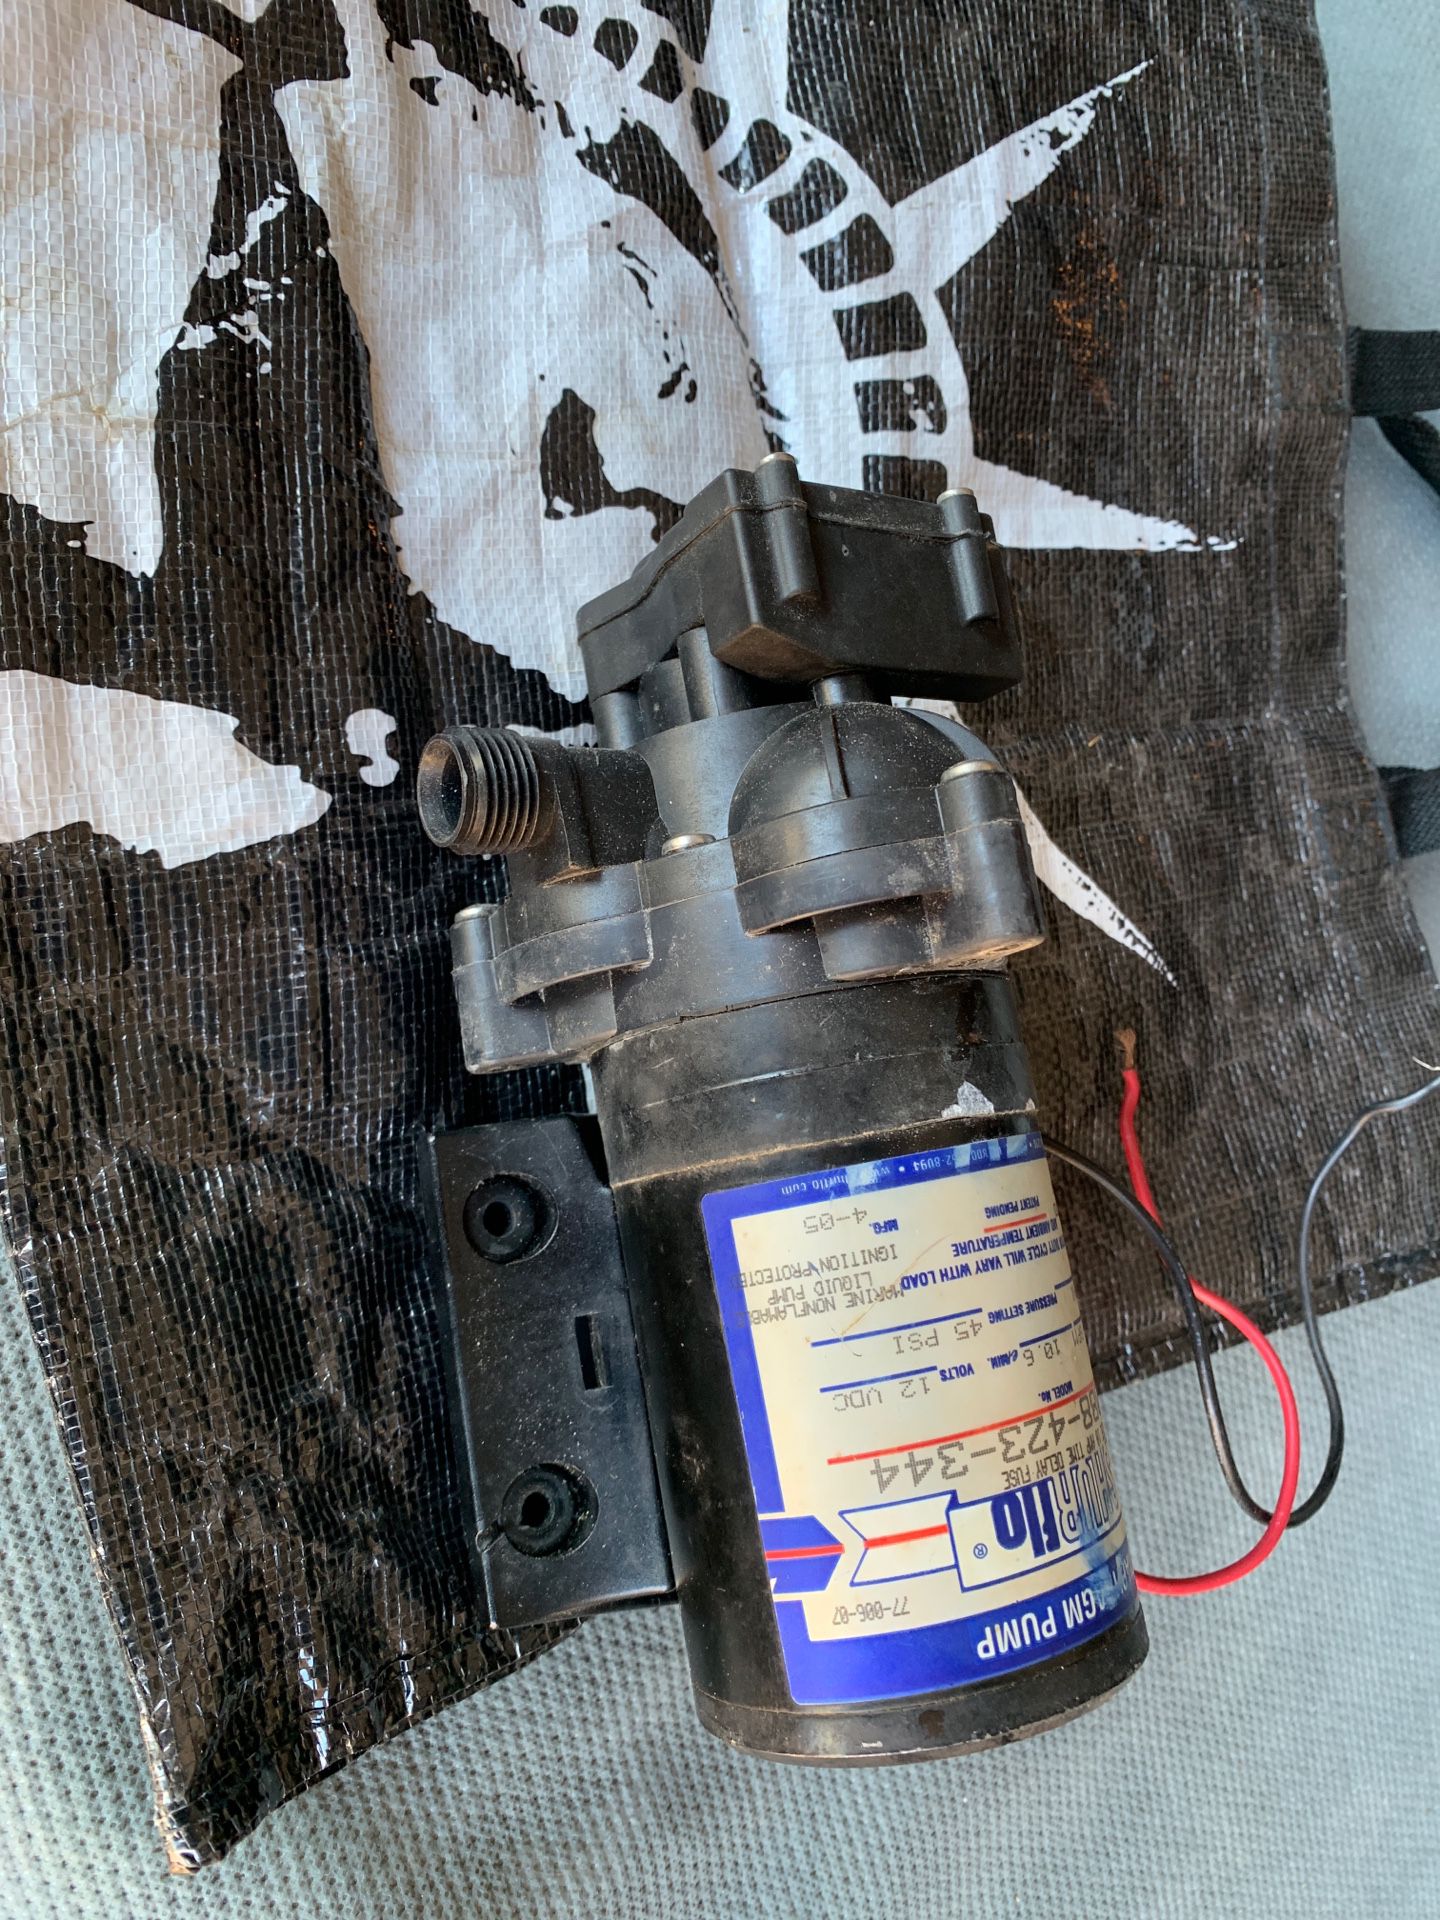 Sureflow diaphragm pump works good inlet connection is broken (can be tapped). Good for parts or repair